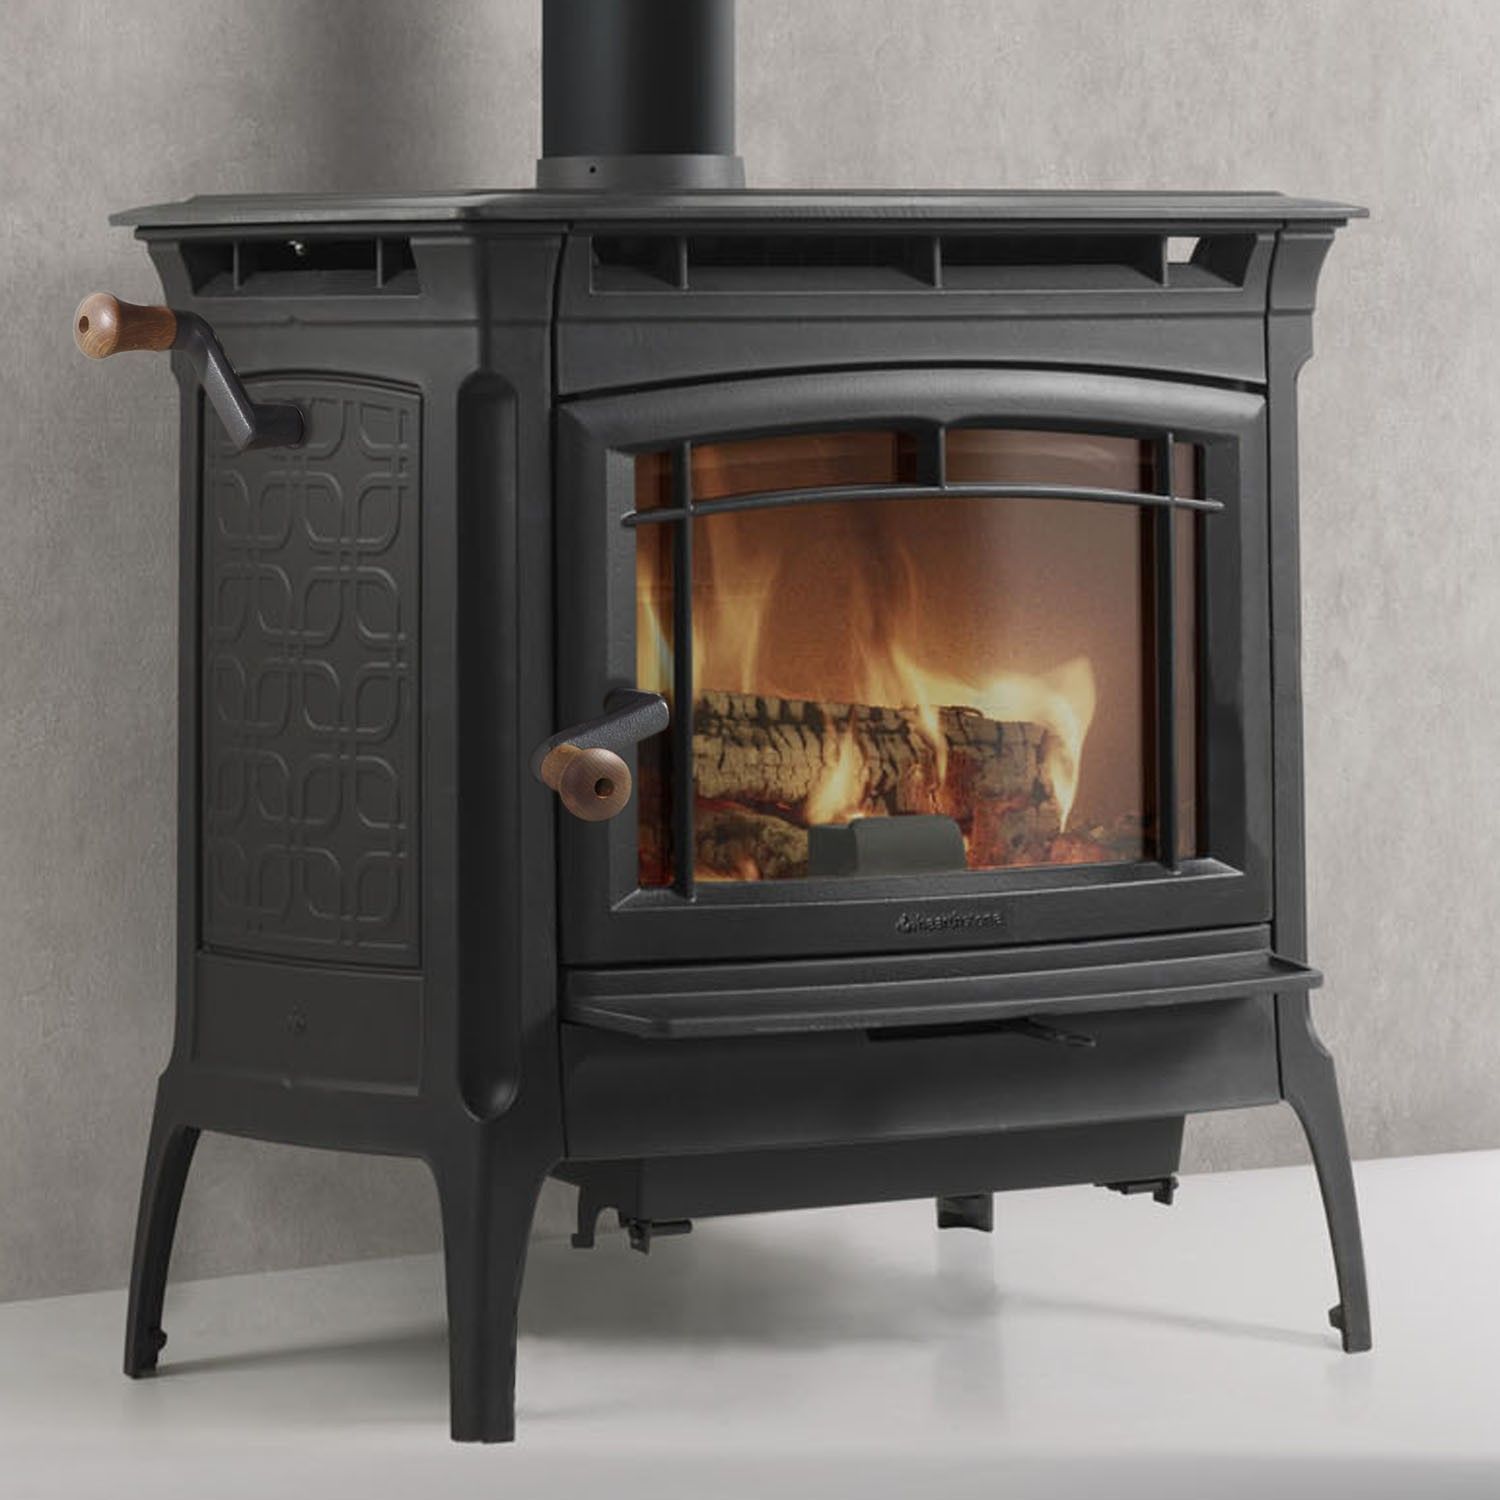 Wood Stove Fireplace Insert Inspirational Pin by Do Wrocklage Harp On Home